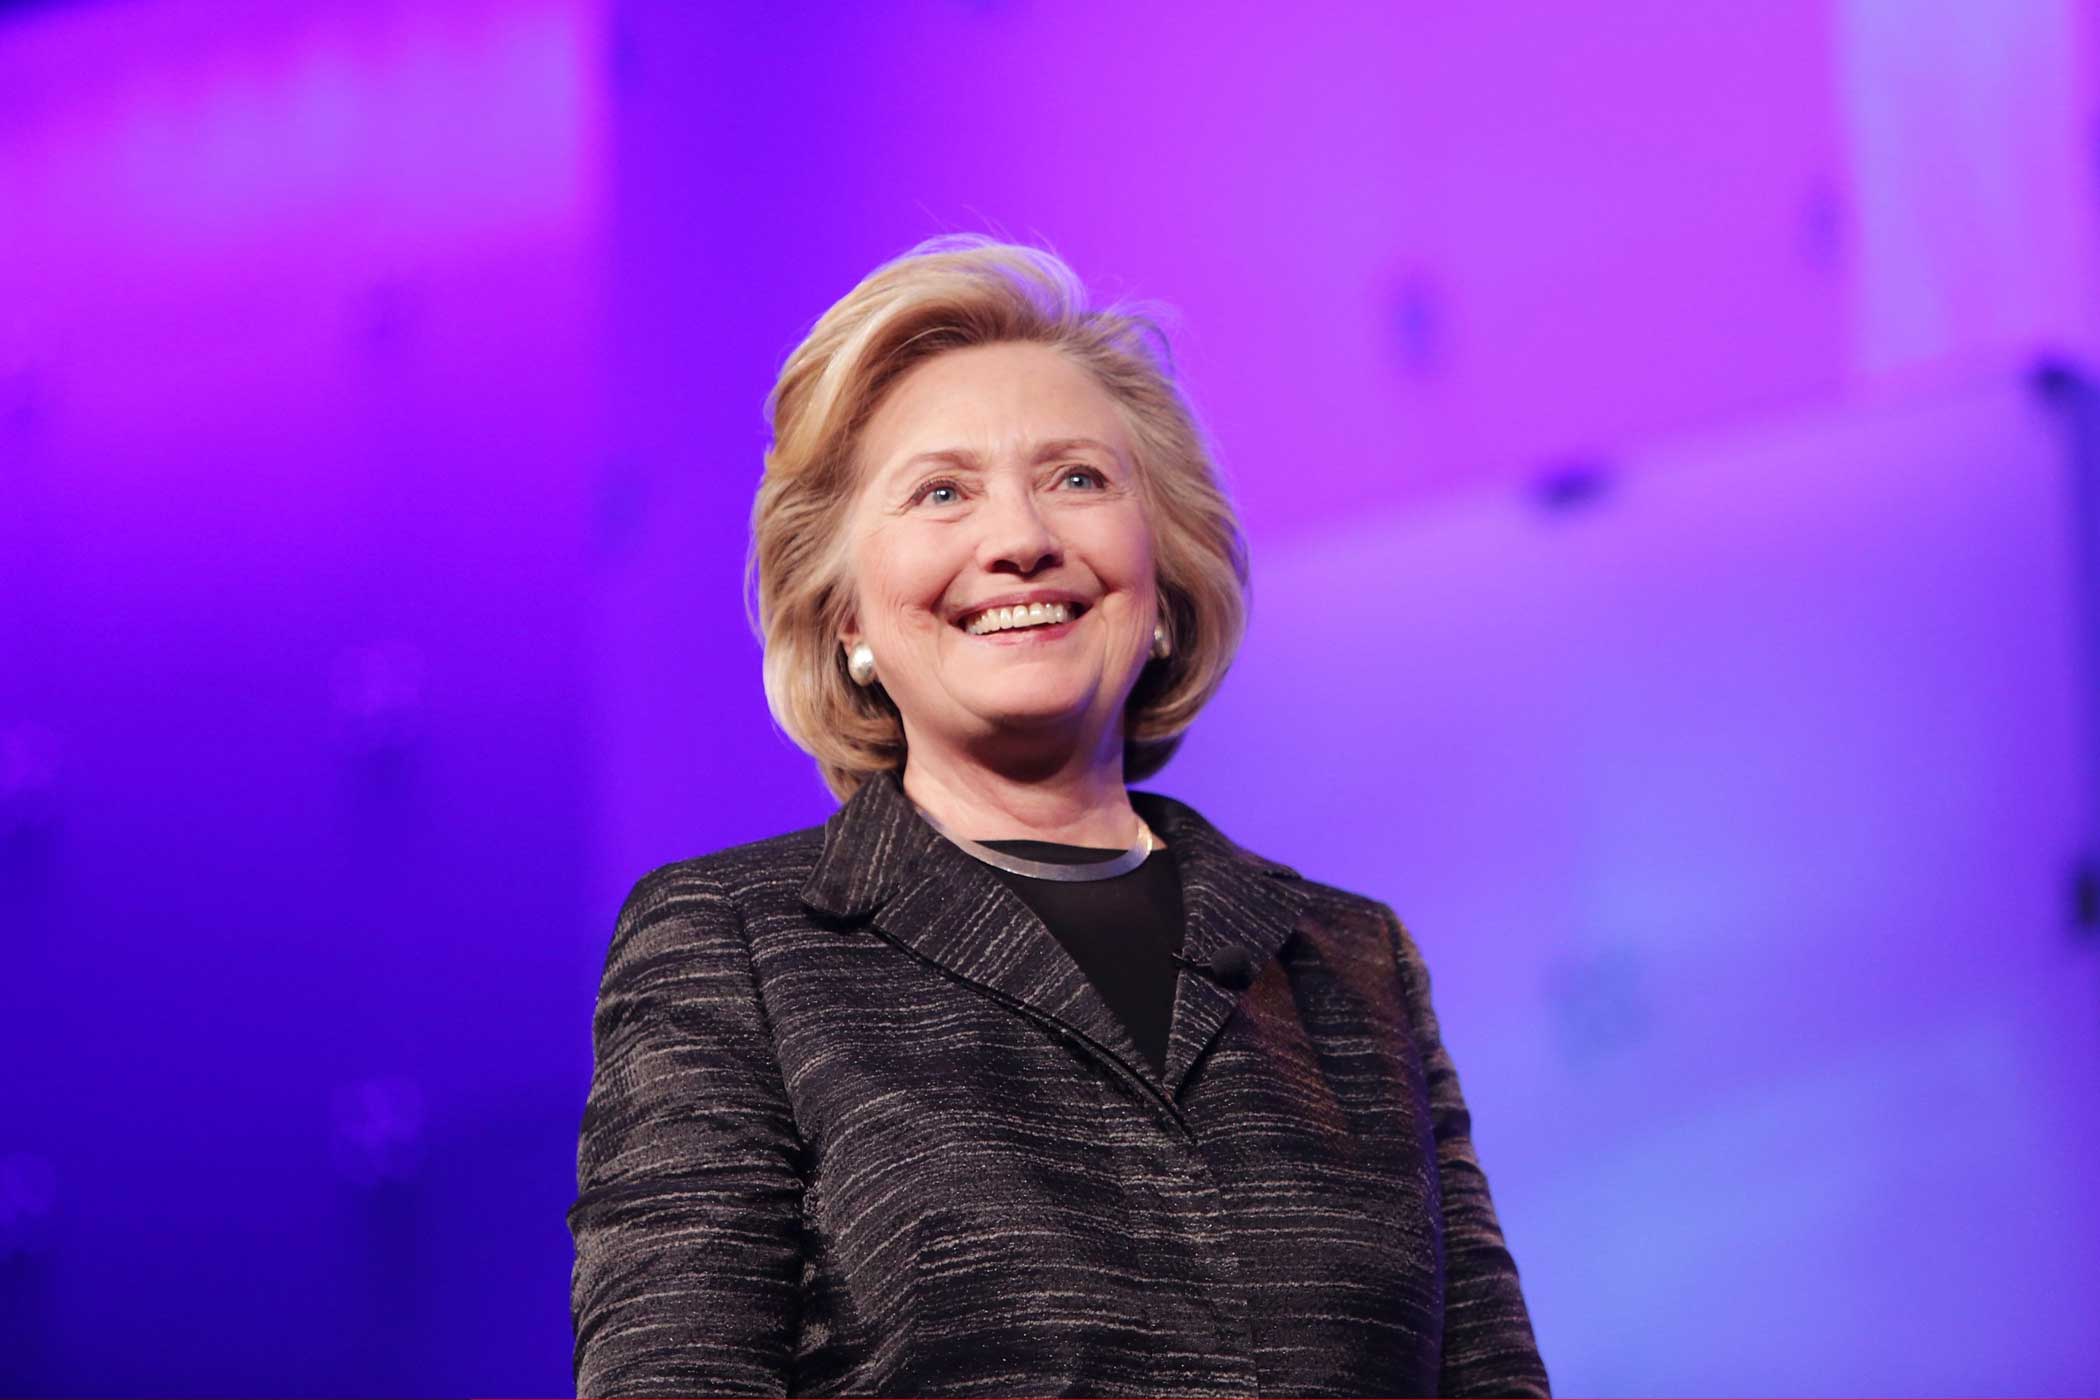 Former United States Secretary of State Hillary Clinton gives the keynote speech during LeadOn:Watermark's Silicon Valley Conference For Women at Santa Clara Convention Center on Feb. 24, 2015 in Santa Clara, California. (Marla Aufmuth—Getty Images)